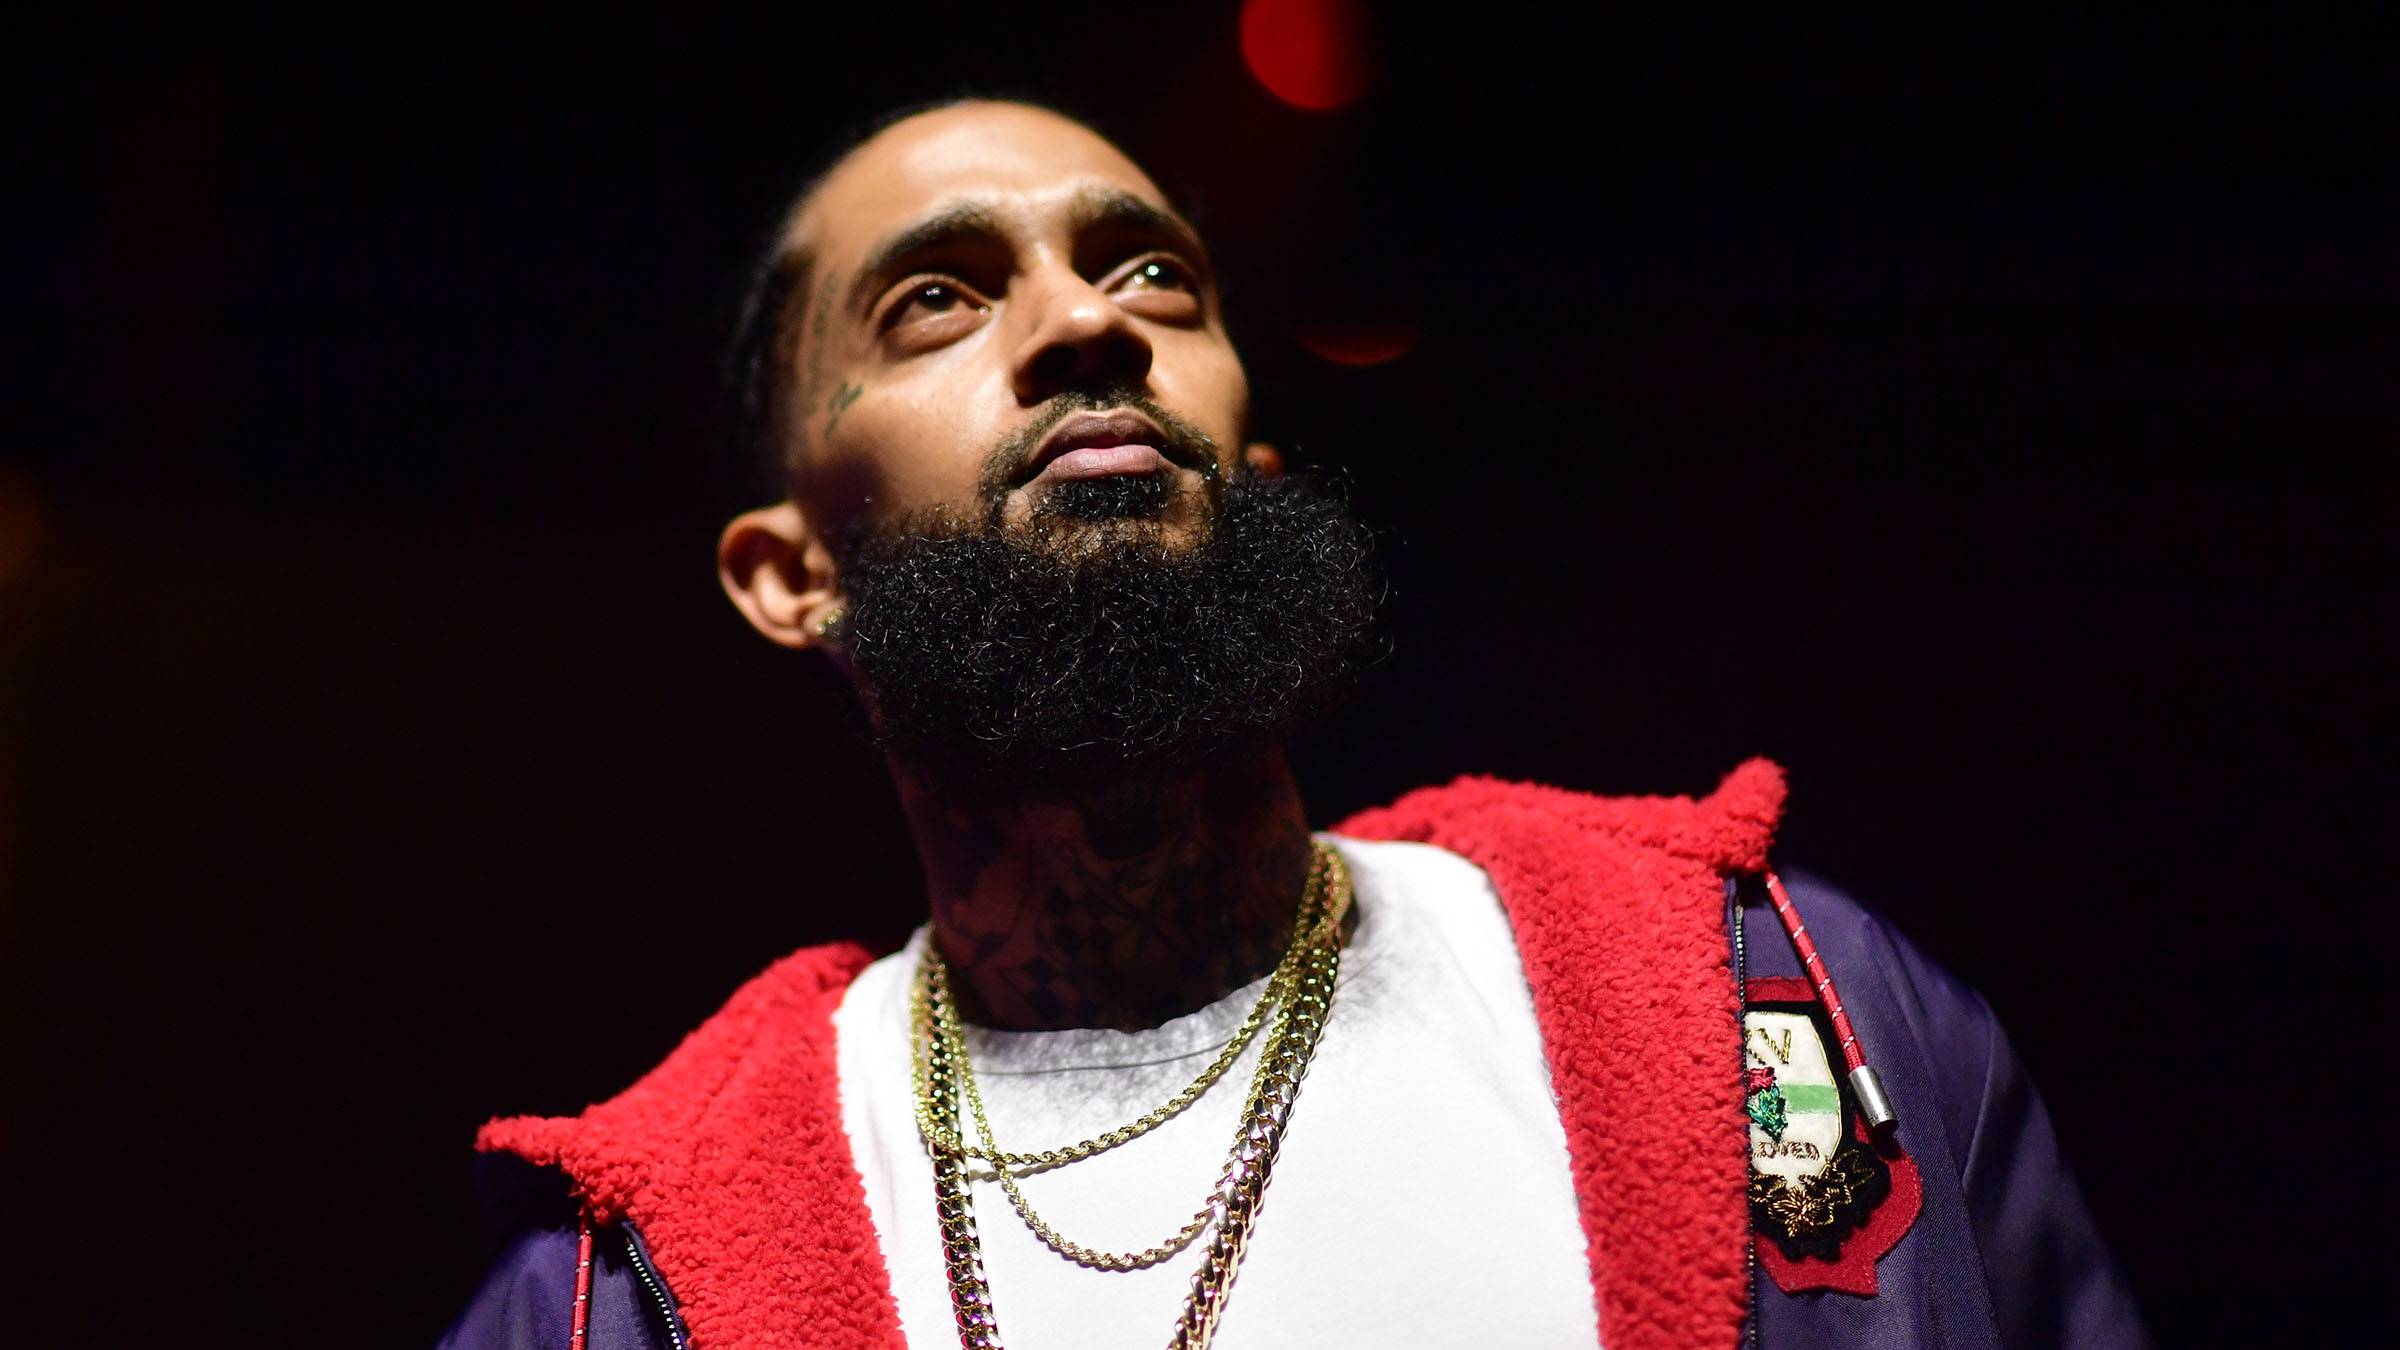 LeBron James to produce documentary about late rapper Nipsey Hussle